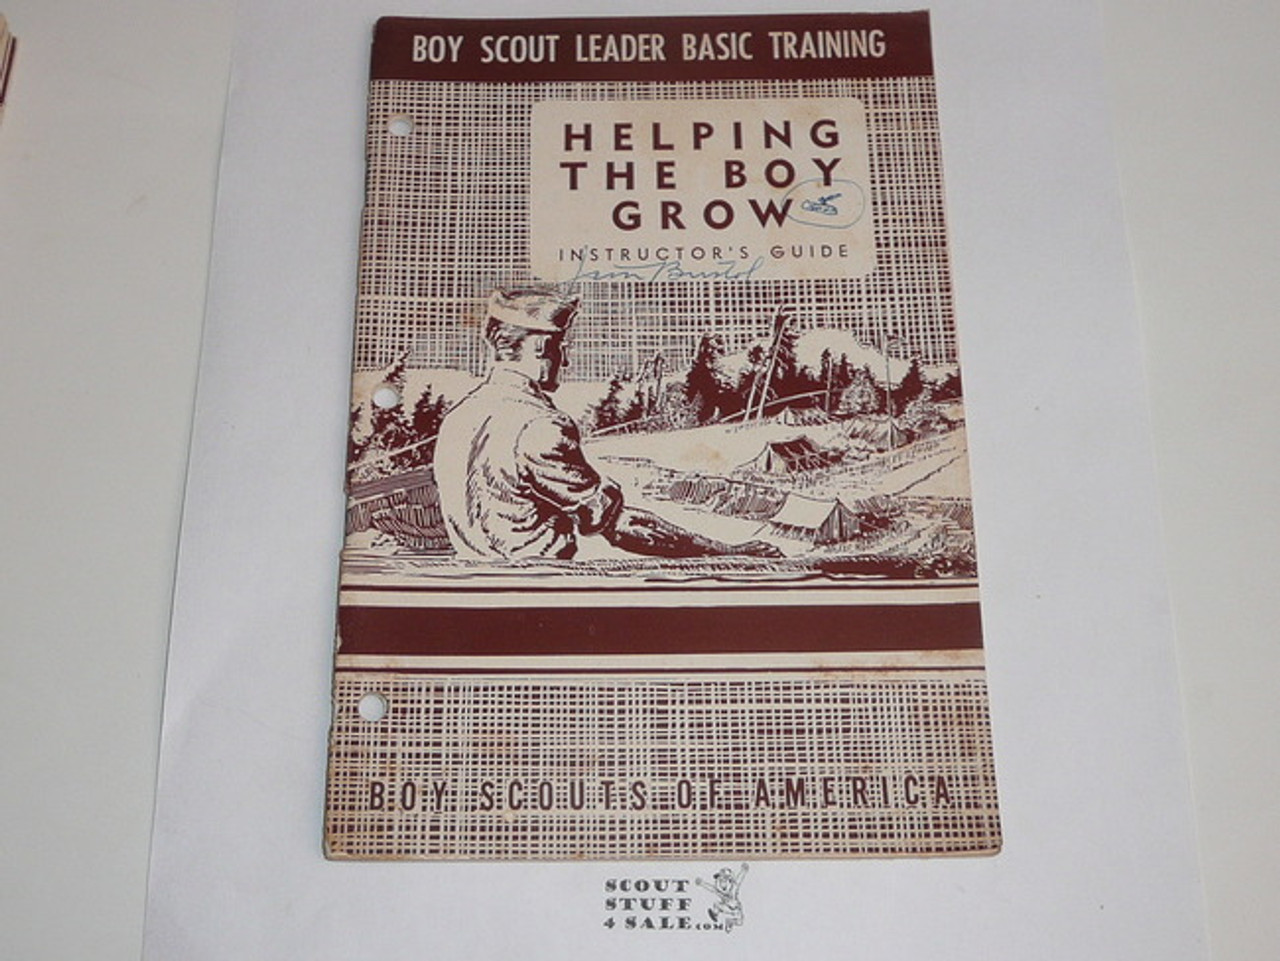 Boy Scout Leader Basic Training, Helping the Boy Grow Instructor's Guide, 1-54 printing